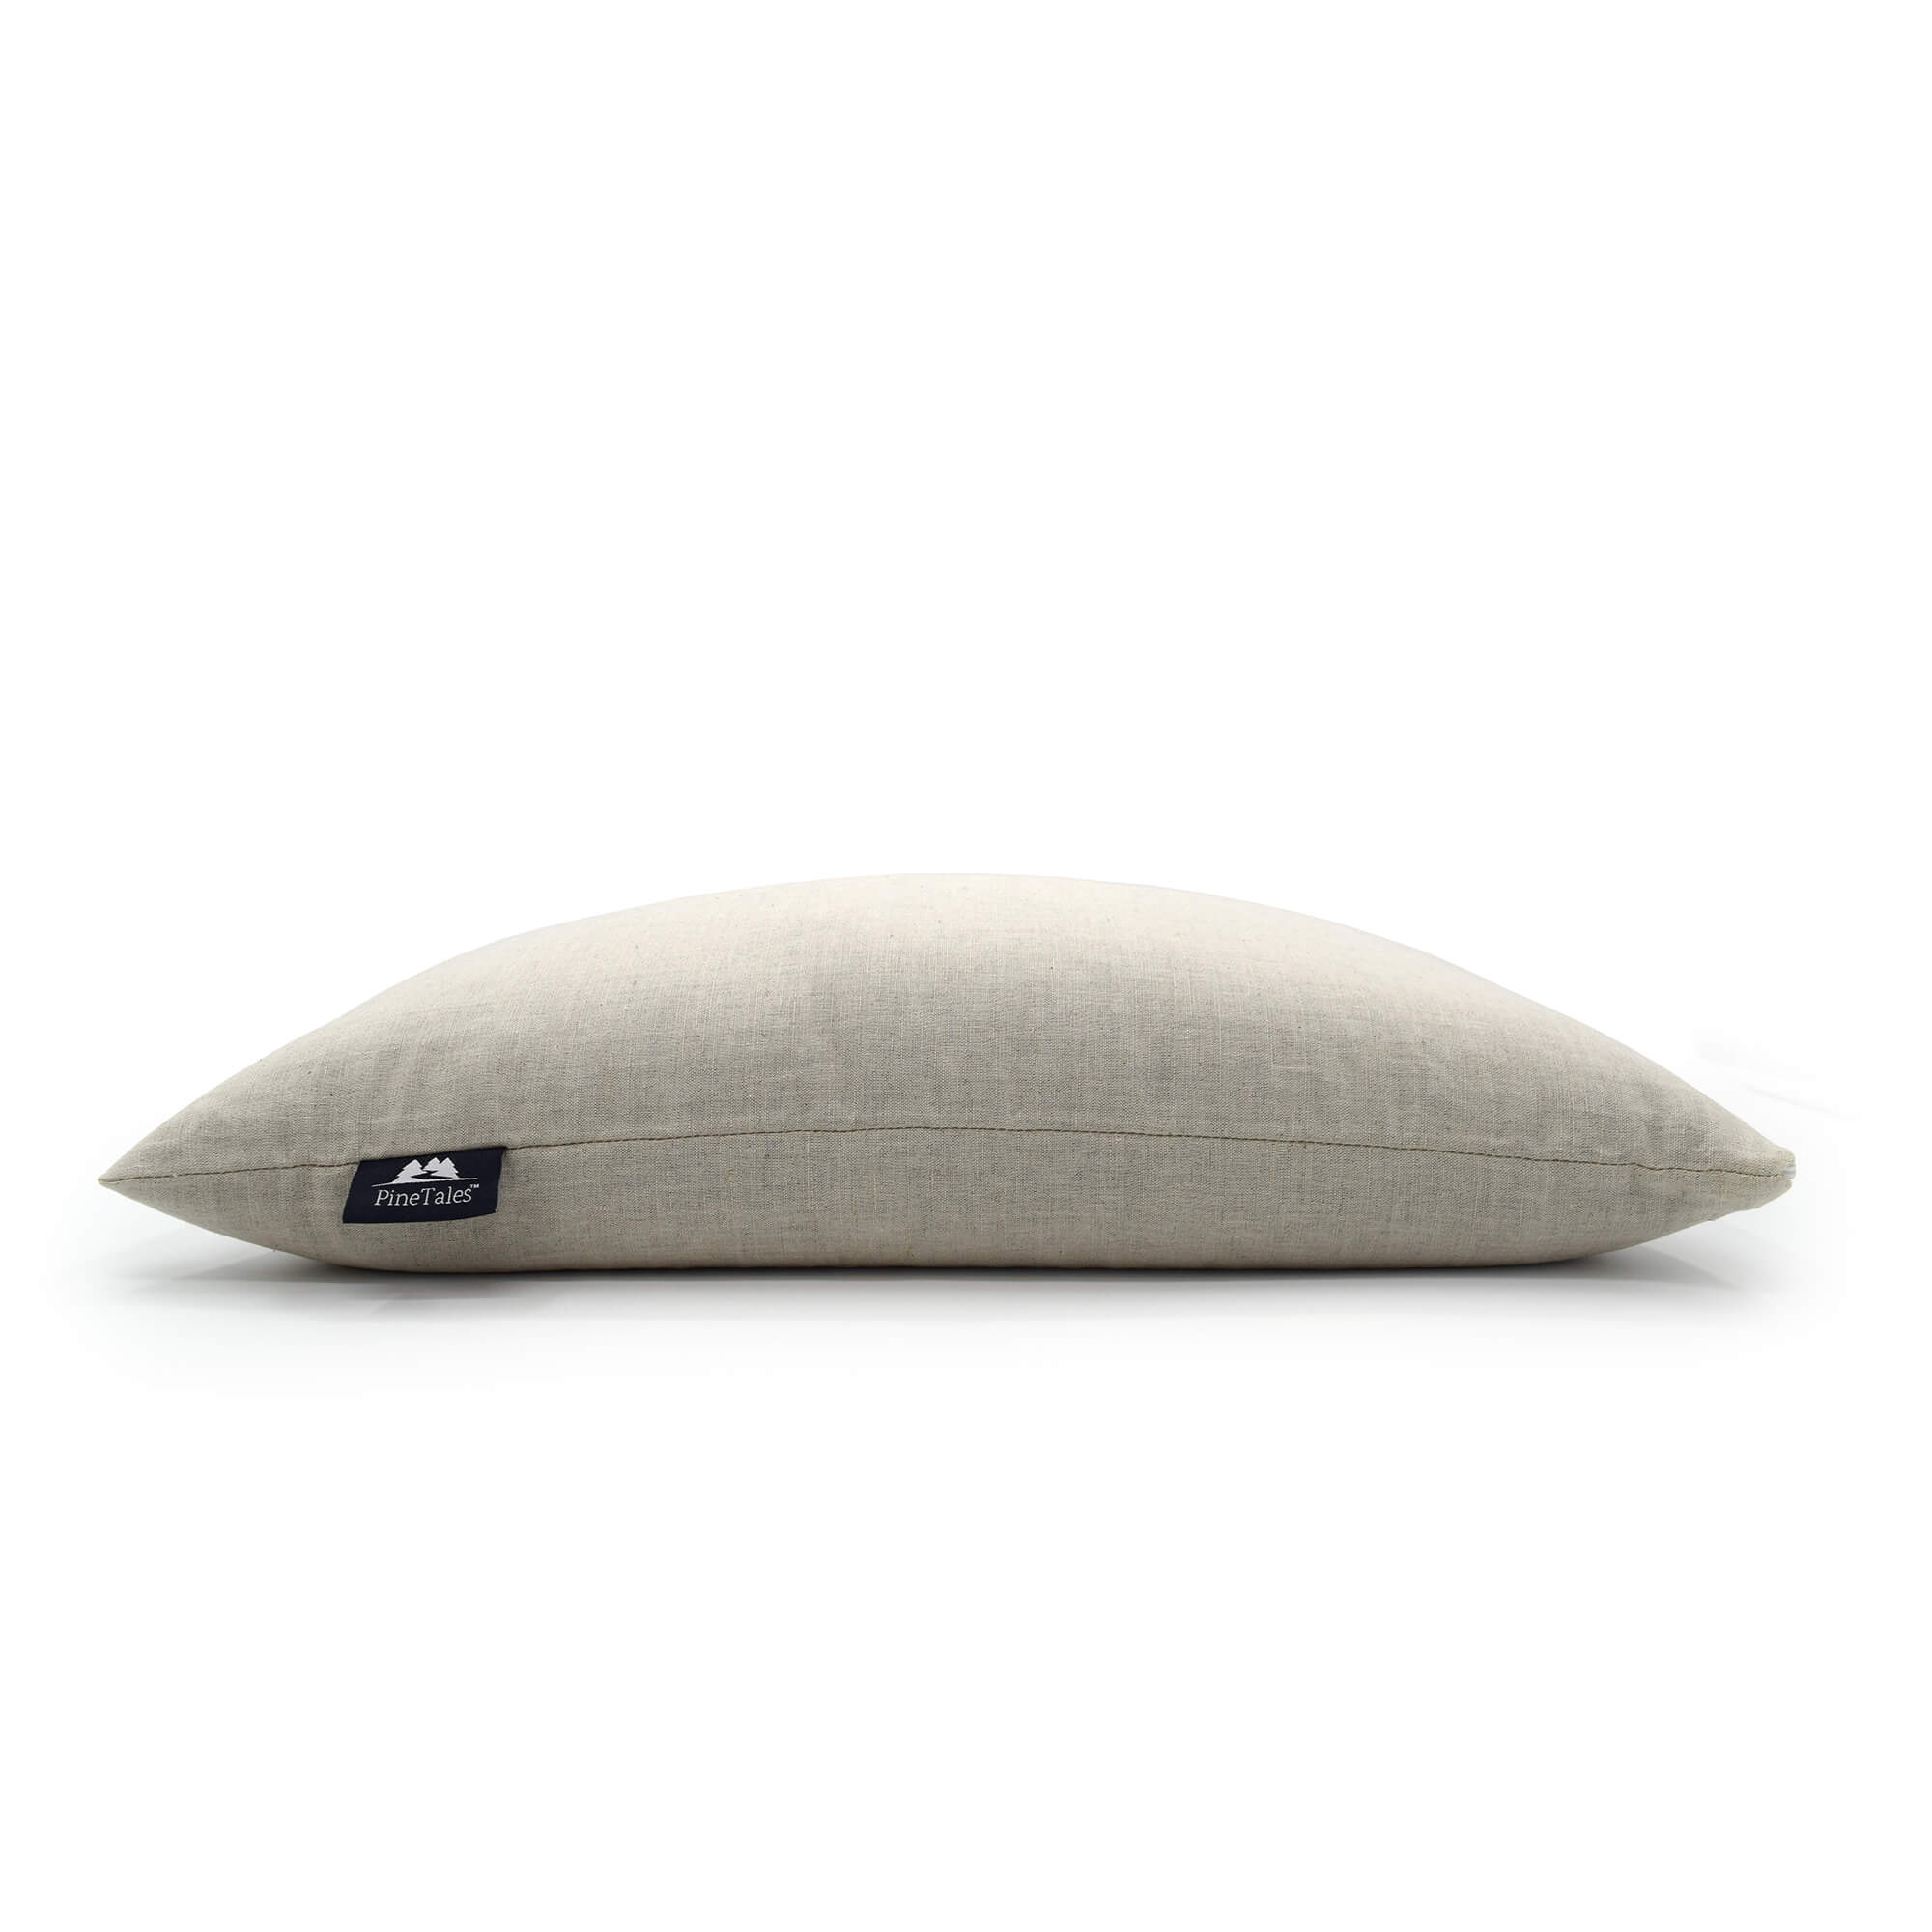 Buckwheat Hull Pillow Deluxe - PineTales - Side Profile View